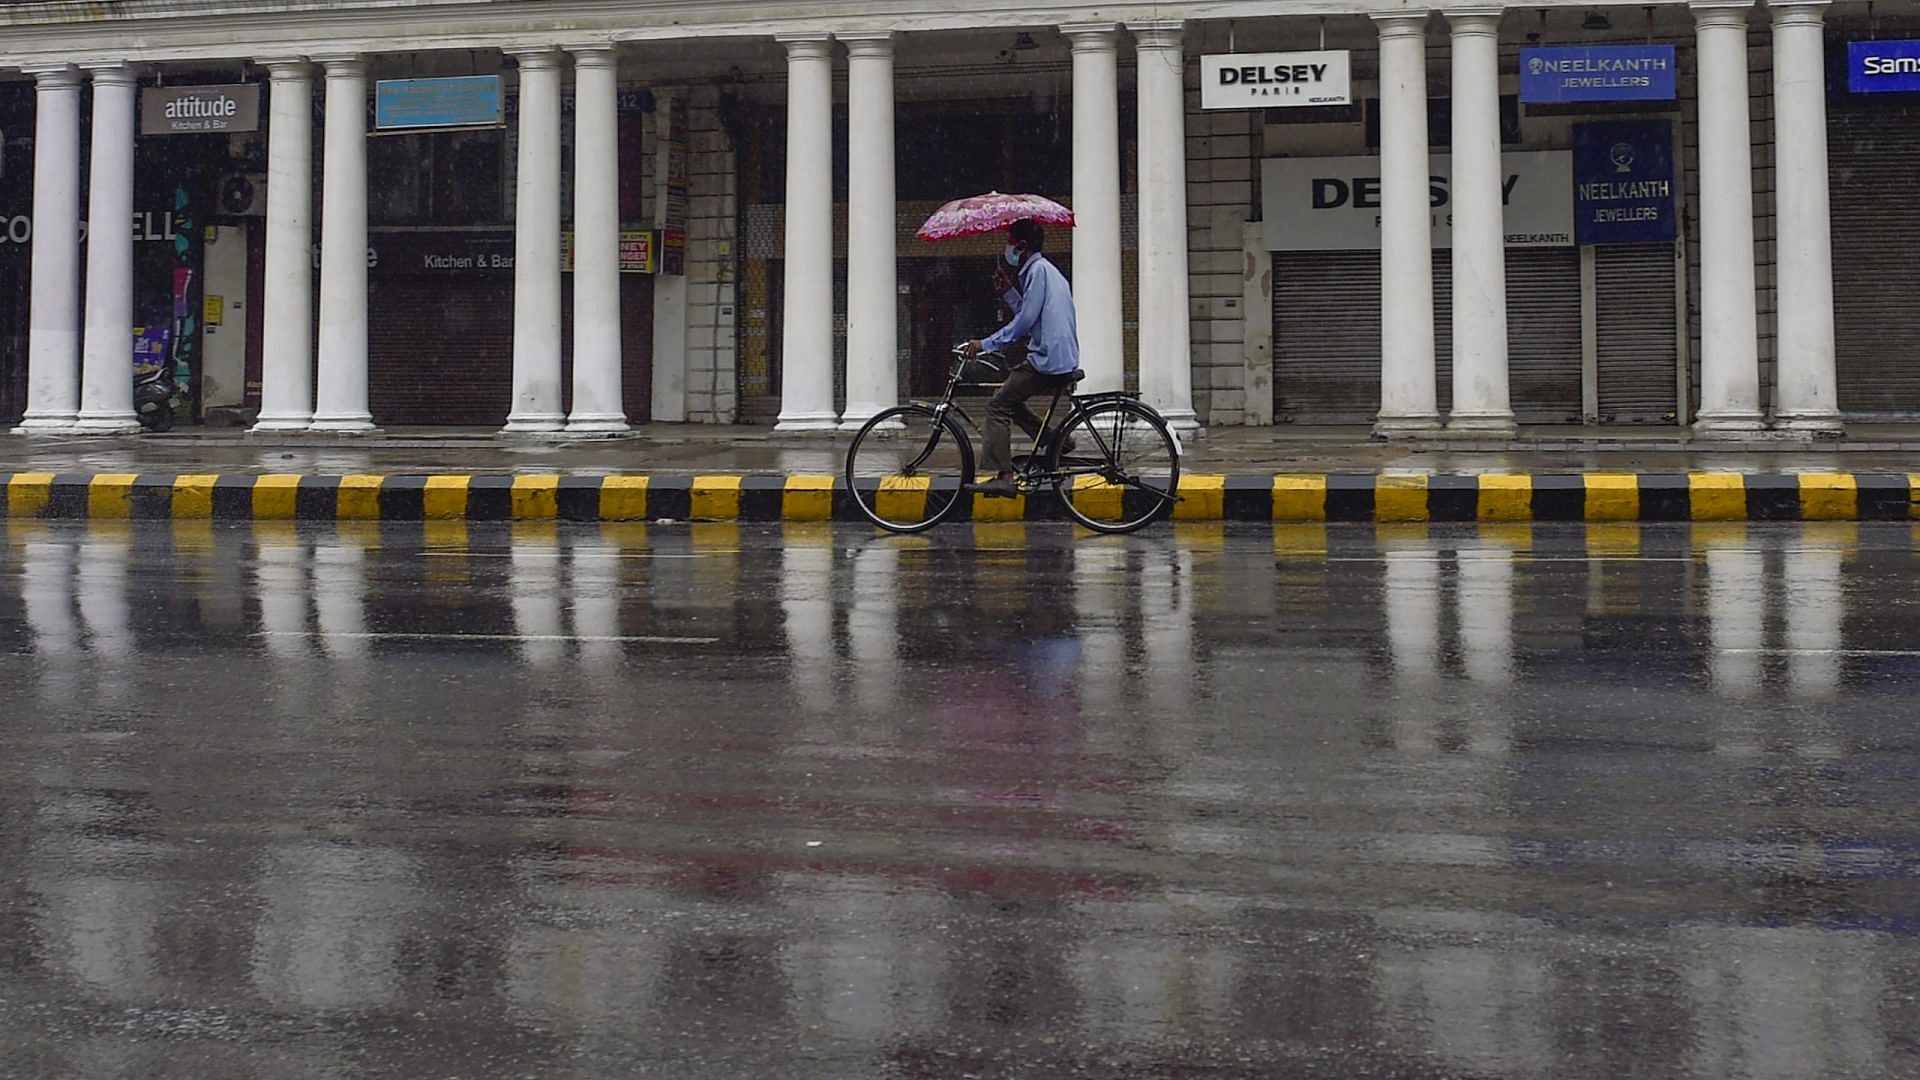 IMD forecasts monsoon arrival in north India, including Delhi, in a day